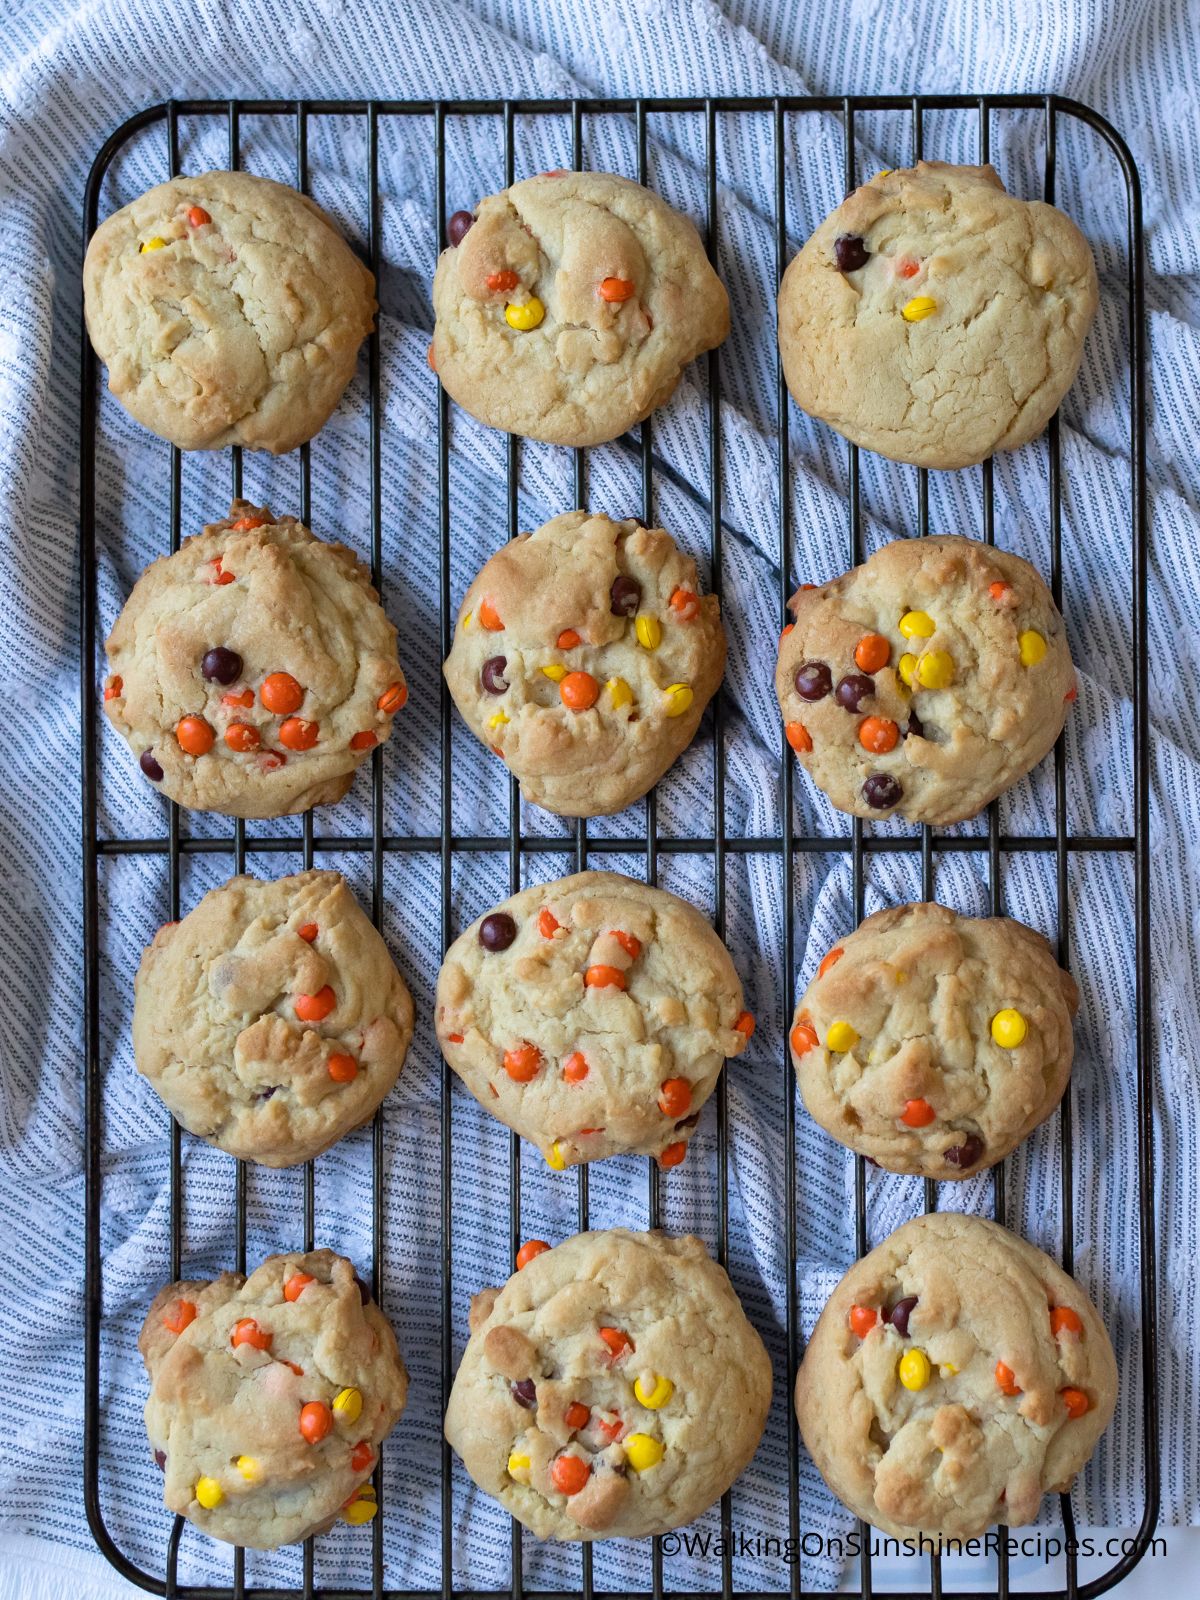 Baked Halloween Cookies on baking rack with Reese's pieces.